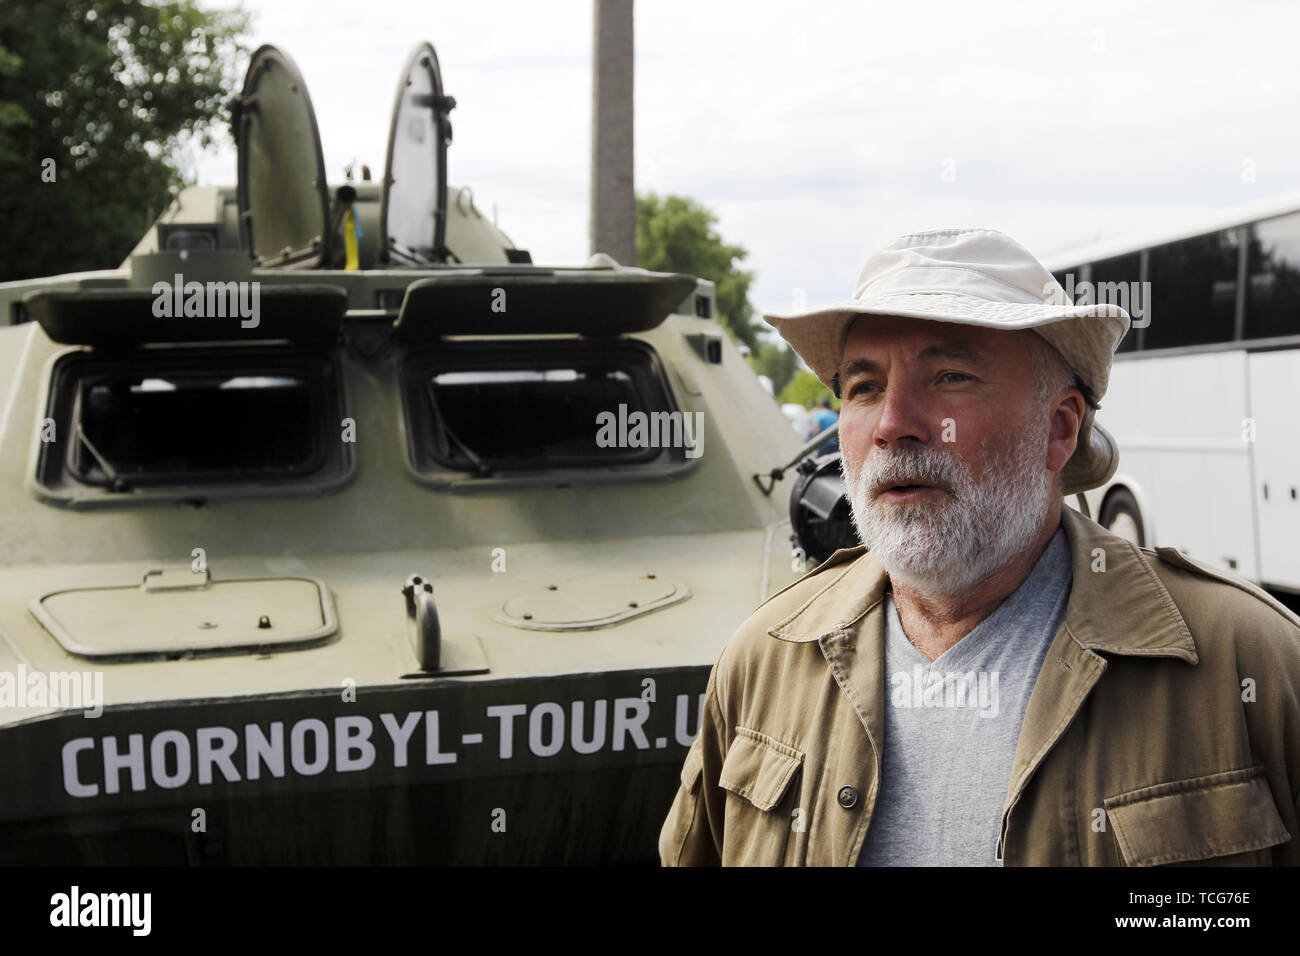 Kiev, Ukraine. 7th June, 2019. SERGII MIRNI, a radiation reconnaissance officer who participated in the compilation of the first maps of radiation pollution in 1986, stands next to an armored personnel carrier at the Dityatki checkpoint in Chernobyl, Ukraine, on 7 June 2019. The success of a U.S. HBO's television miniseries 'Chernobyl' has renewed interest around the world on Ukraine's 1986 nuclear disaster. Tourism to Chernobyl has spiked 40% following the debut of the HBO series in May, tour agencies reported. Credit: ZUMA Press, Inc./Alamy Live News Stock Photo